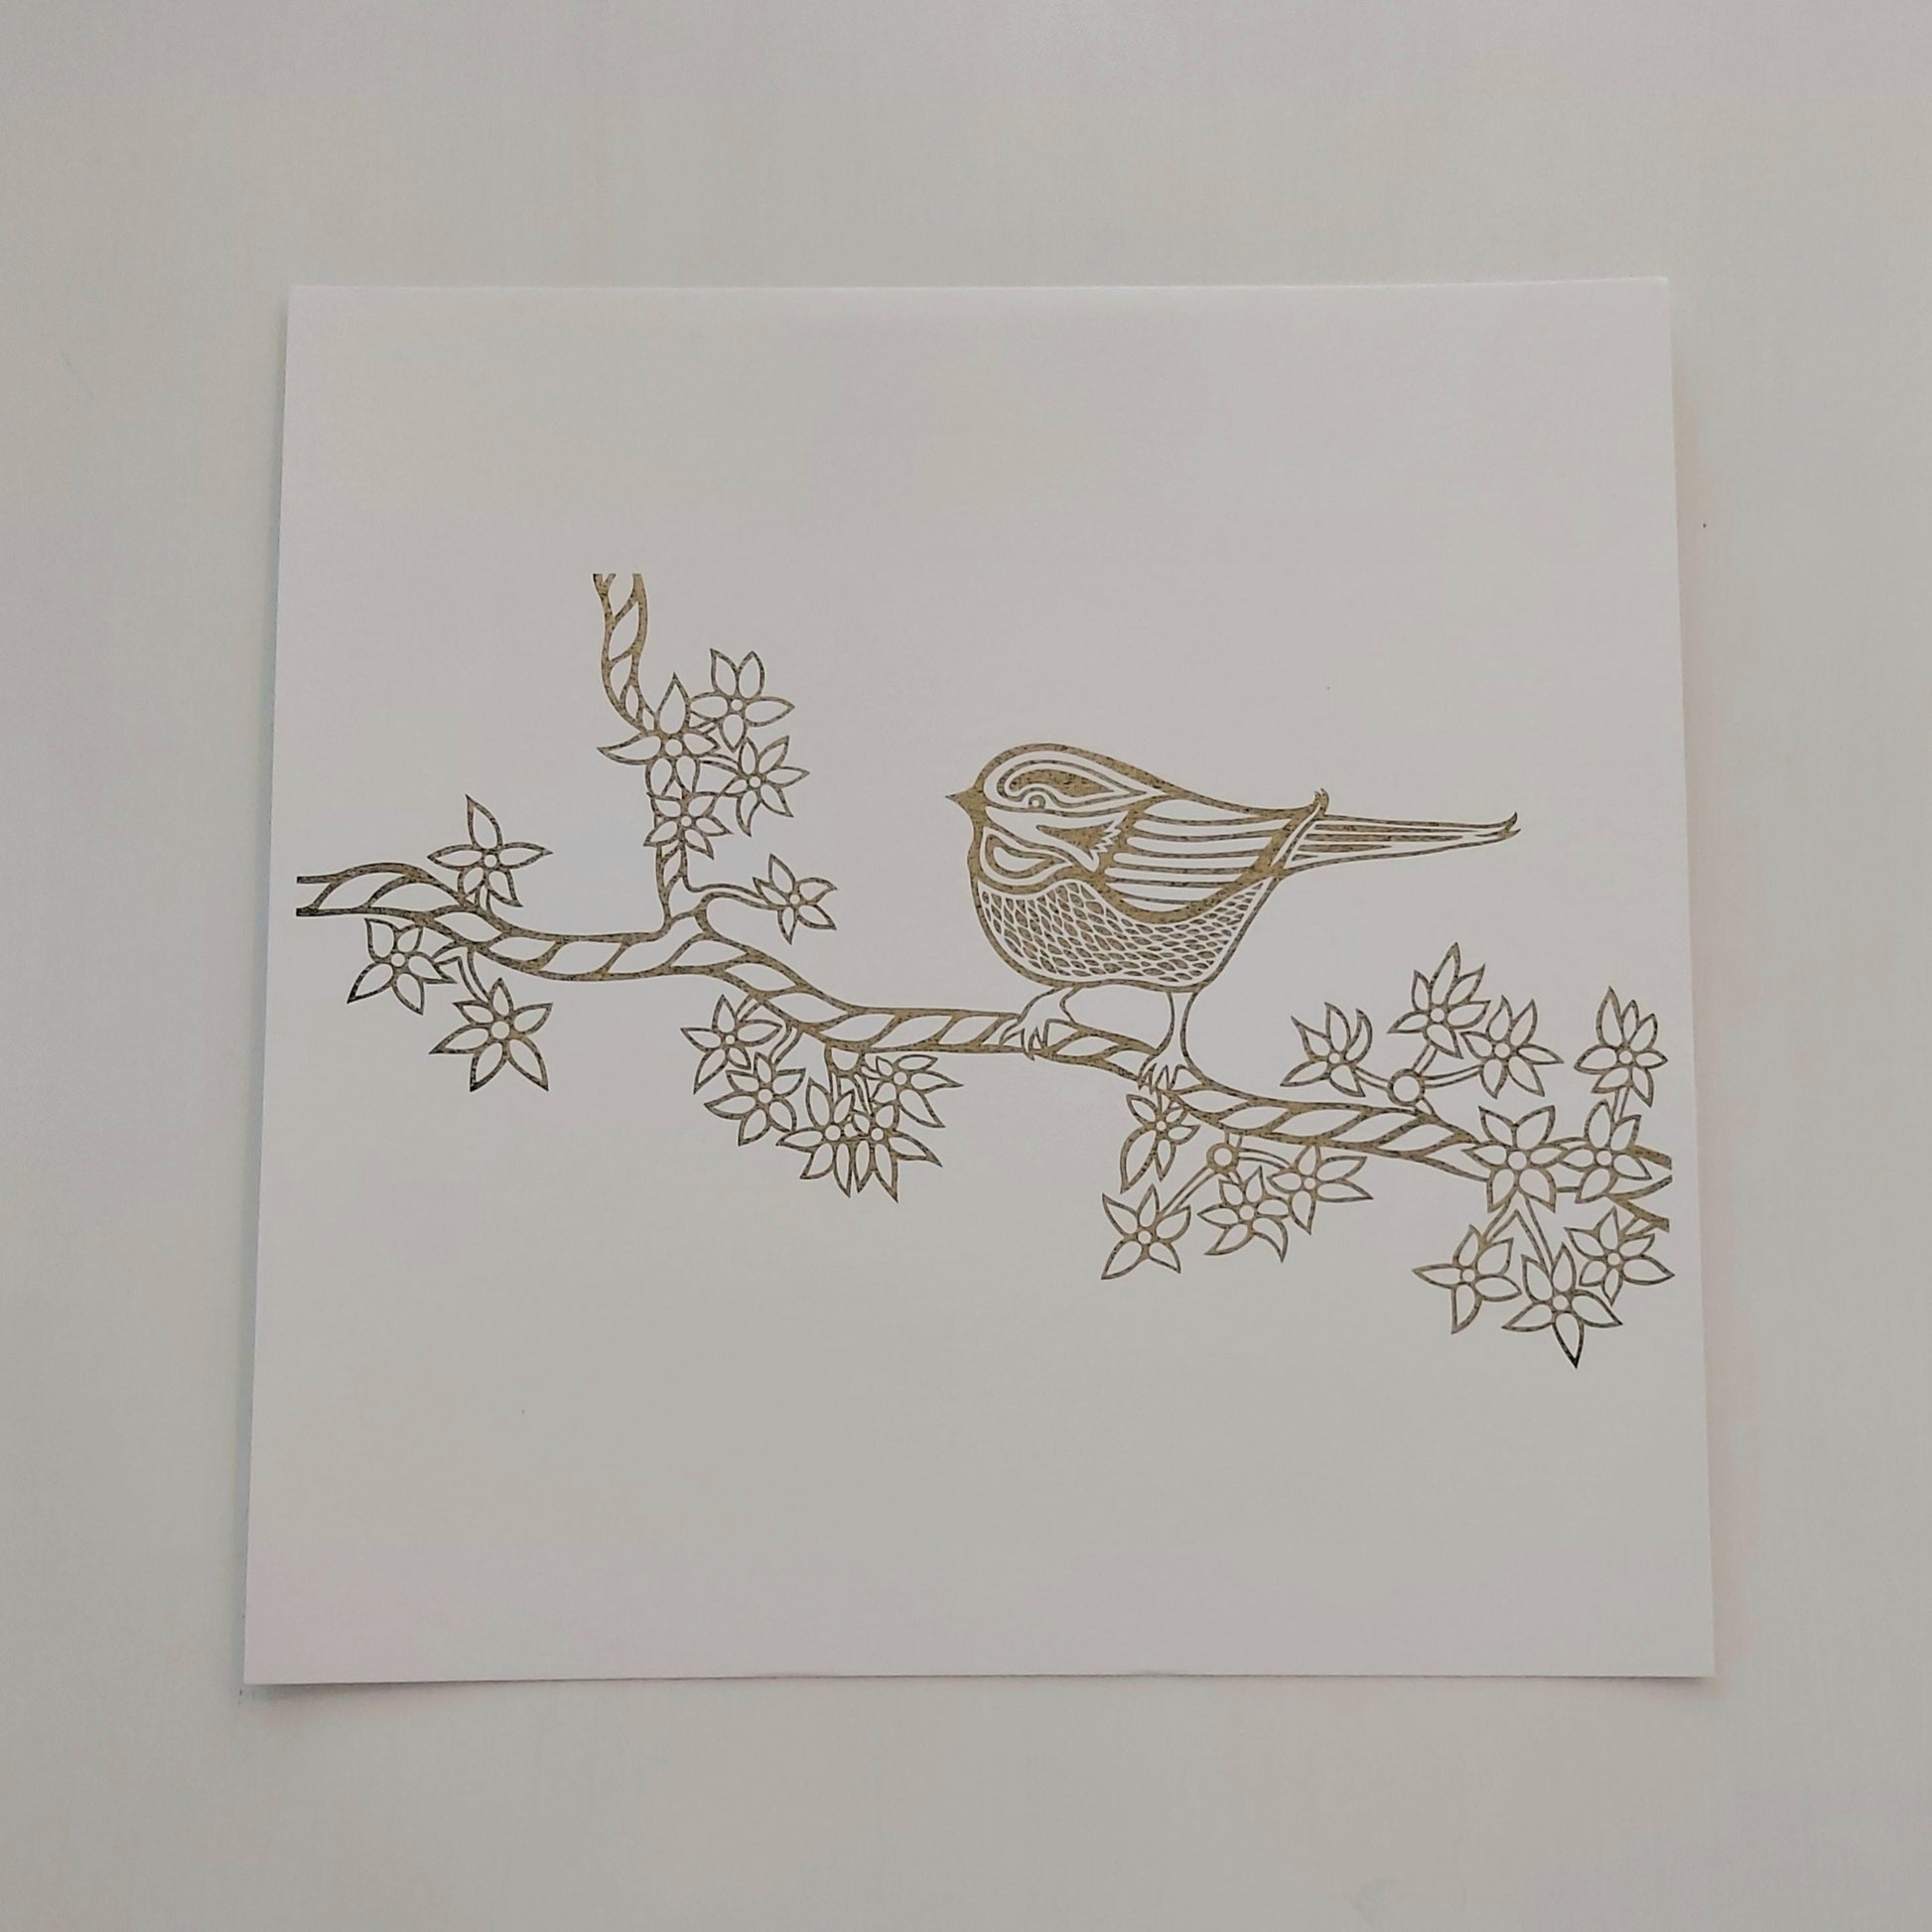 Print of Patrick Hunter's painting of a small bird on a spring branch in gold leaf on white, woodland art style.